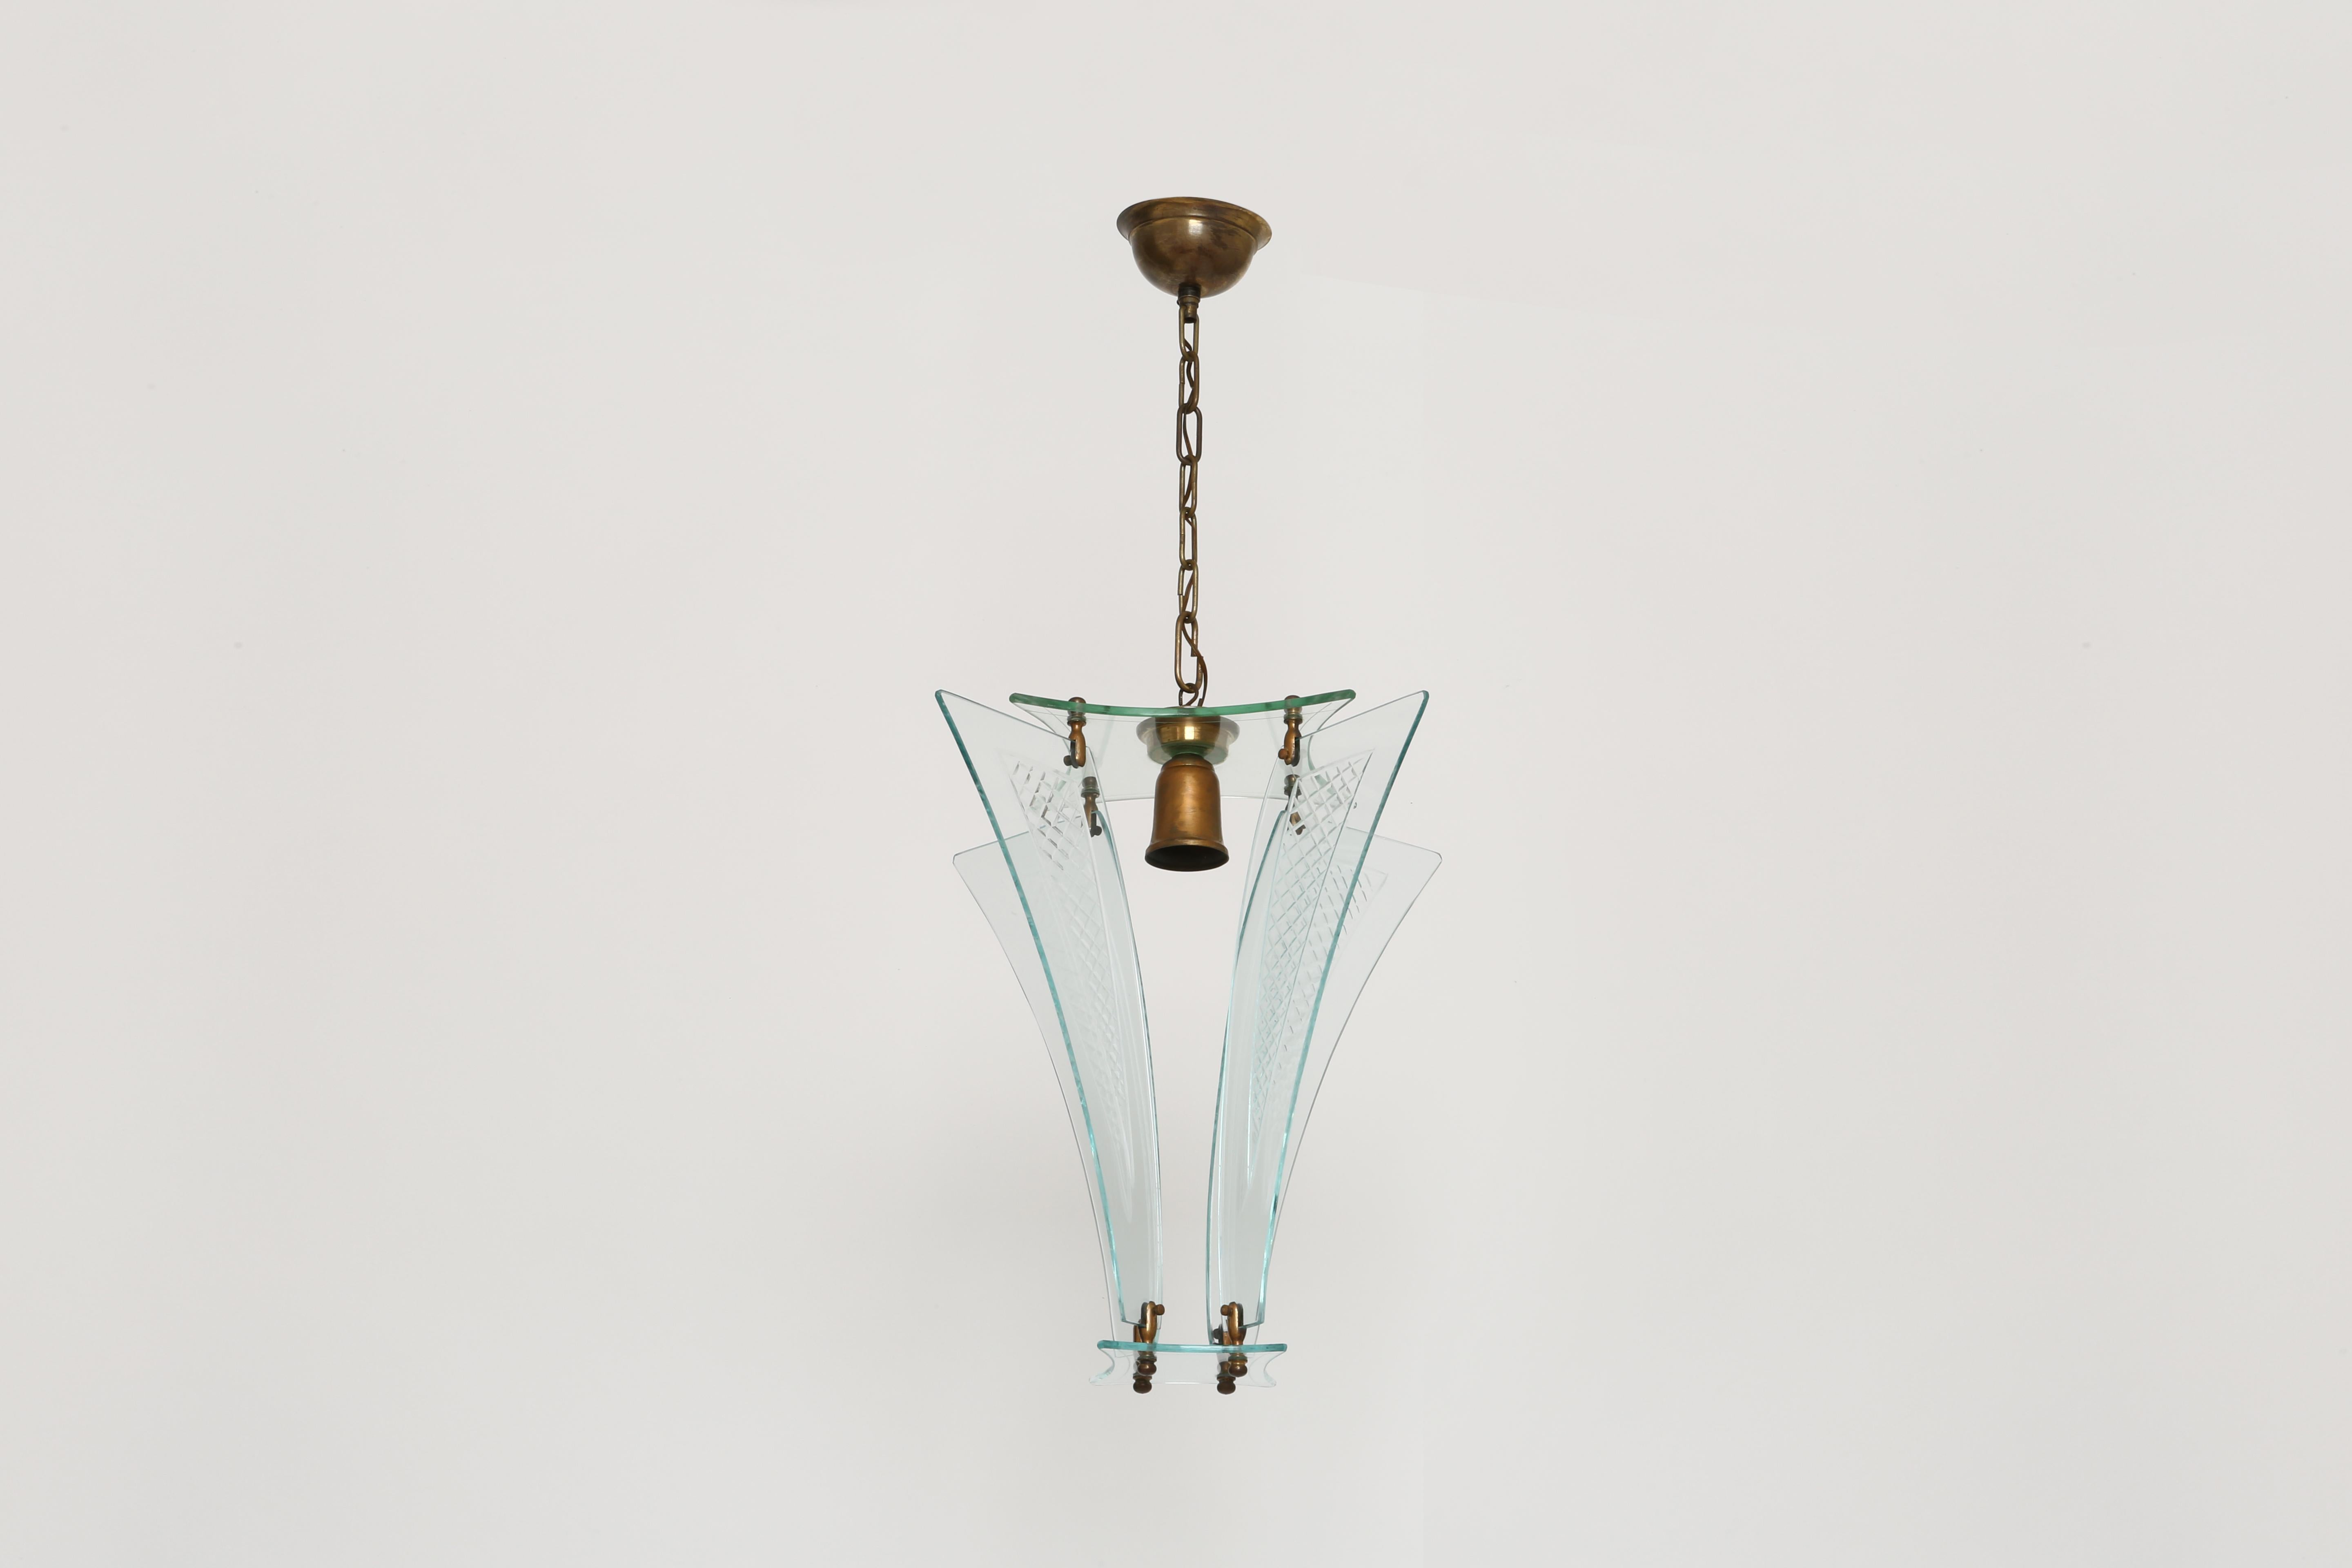 Fontana Arte style lantern.
Murano glass, brass.
Designed and made in Italy in 1960s.
Takes 1 medium base bulb.
Complimentary US rewiring upon request.

We take pride in bringing vintage fixtures to their full glory again.
At Illustris Lighting our